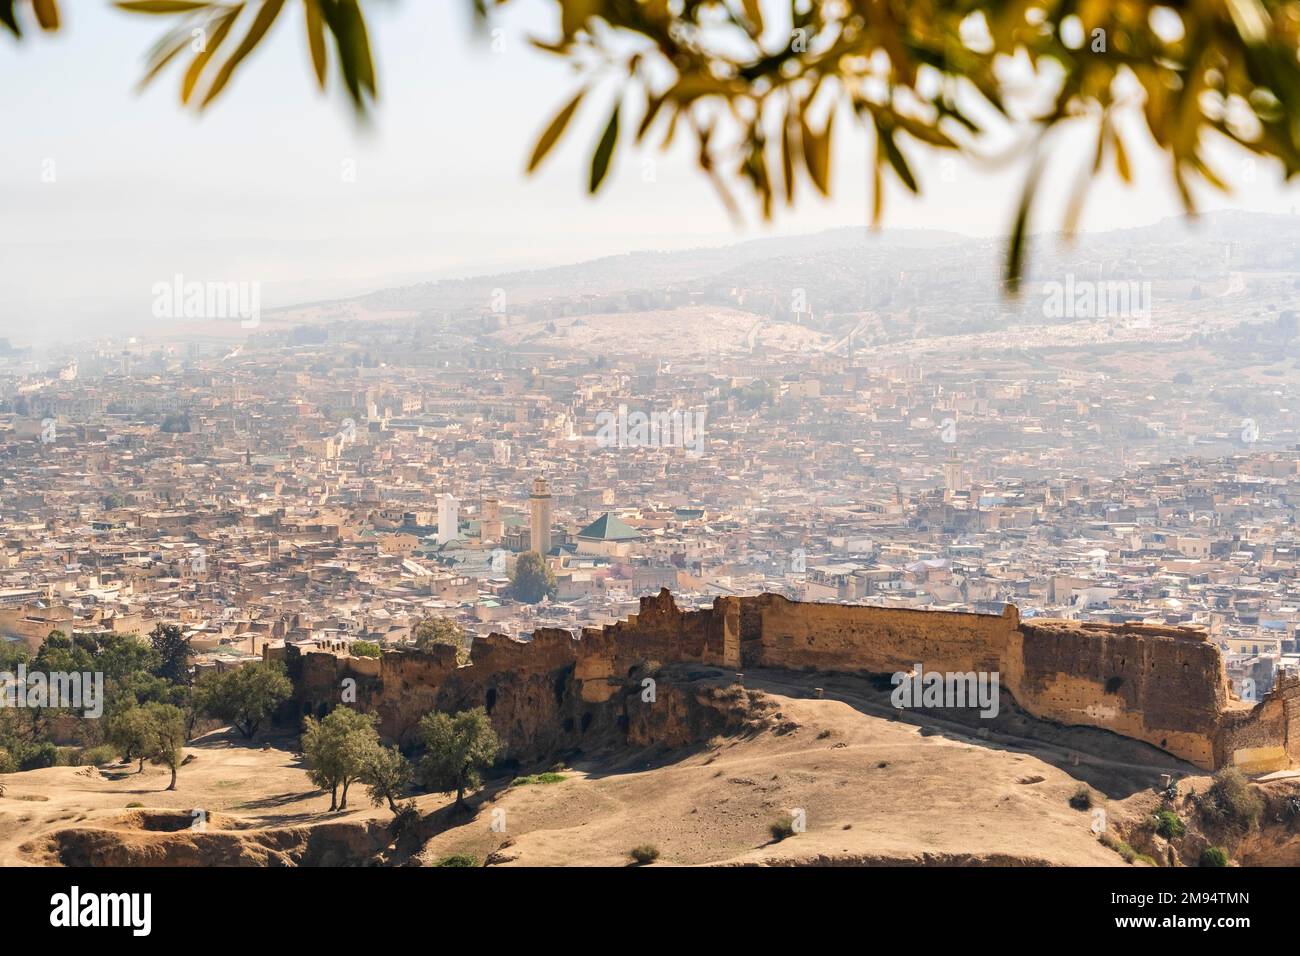 Fez skyline with city walls visible in the first plan, Morocco, North Africa Stock Photo